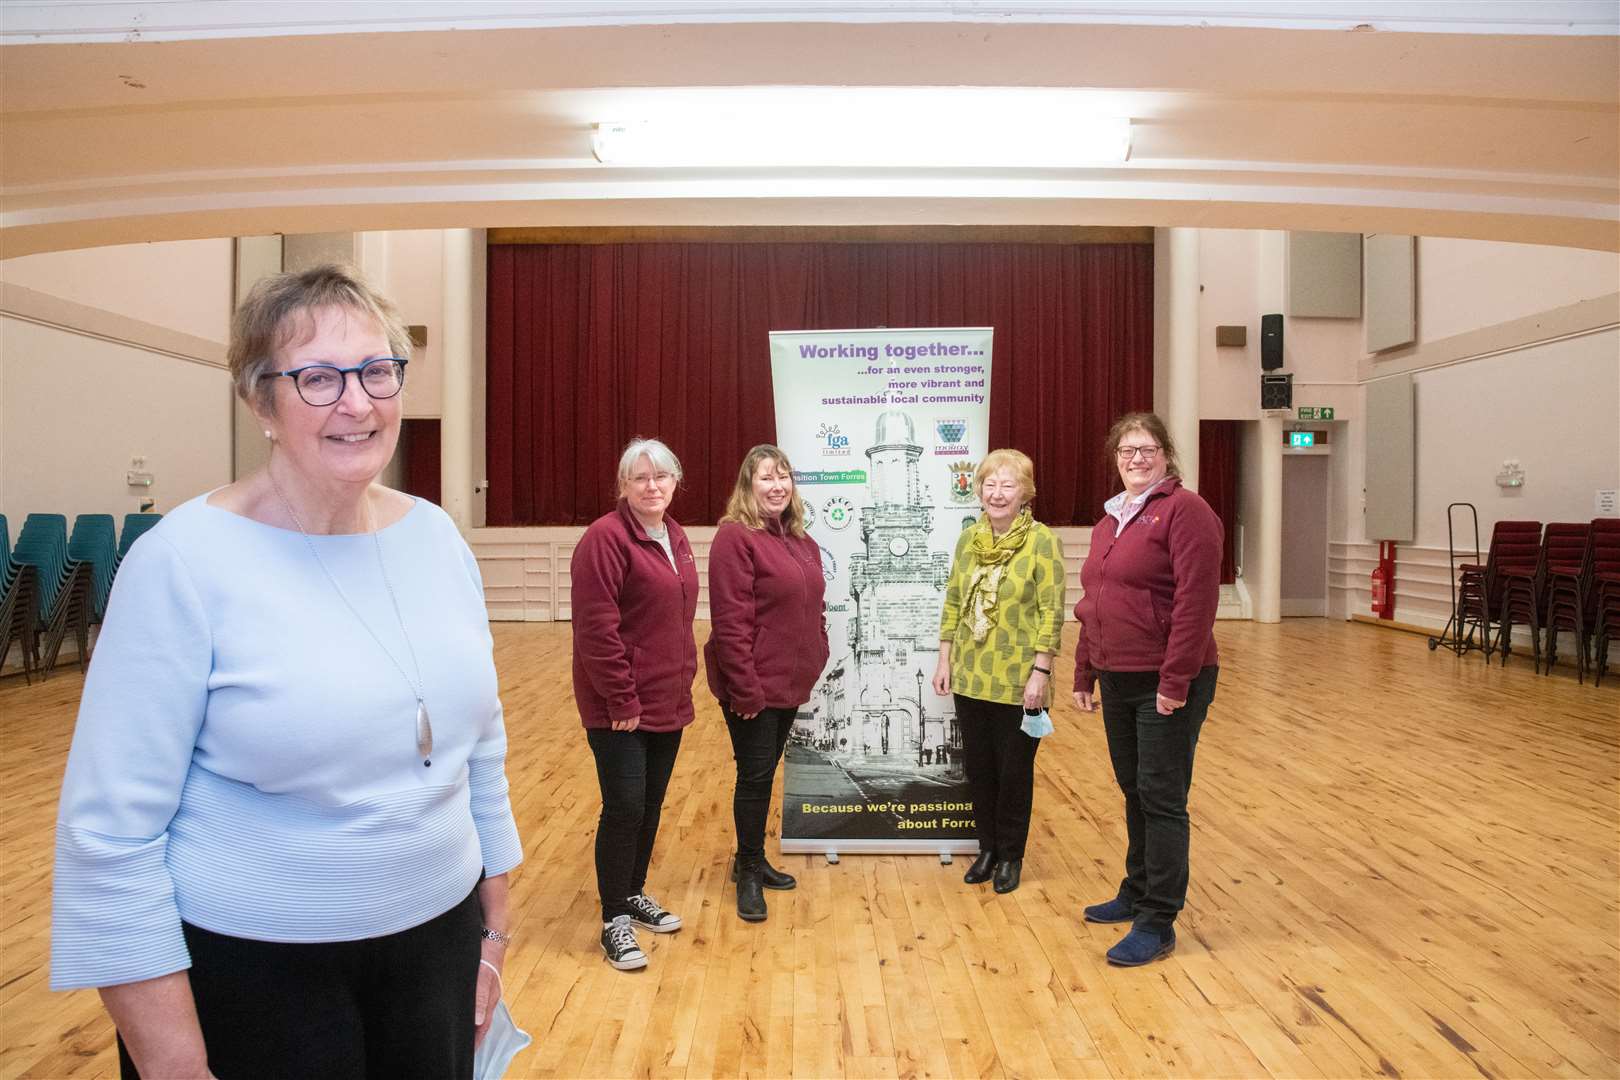 Gearing up for the volunteer marketplace event at Forres Town Hall are (front) Forres Rotary Club’s Sheena MacGillivray who is joined by (from left) Loretta Oliphant, Lindsey Standring, Sandra Maclennan and Debbie Herron. Picture: Daniel Forsyth